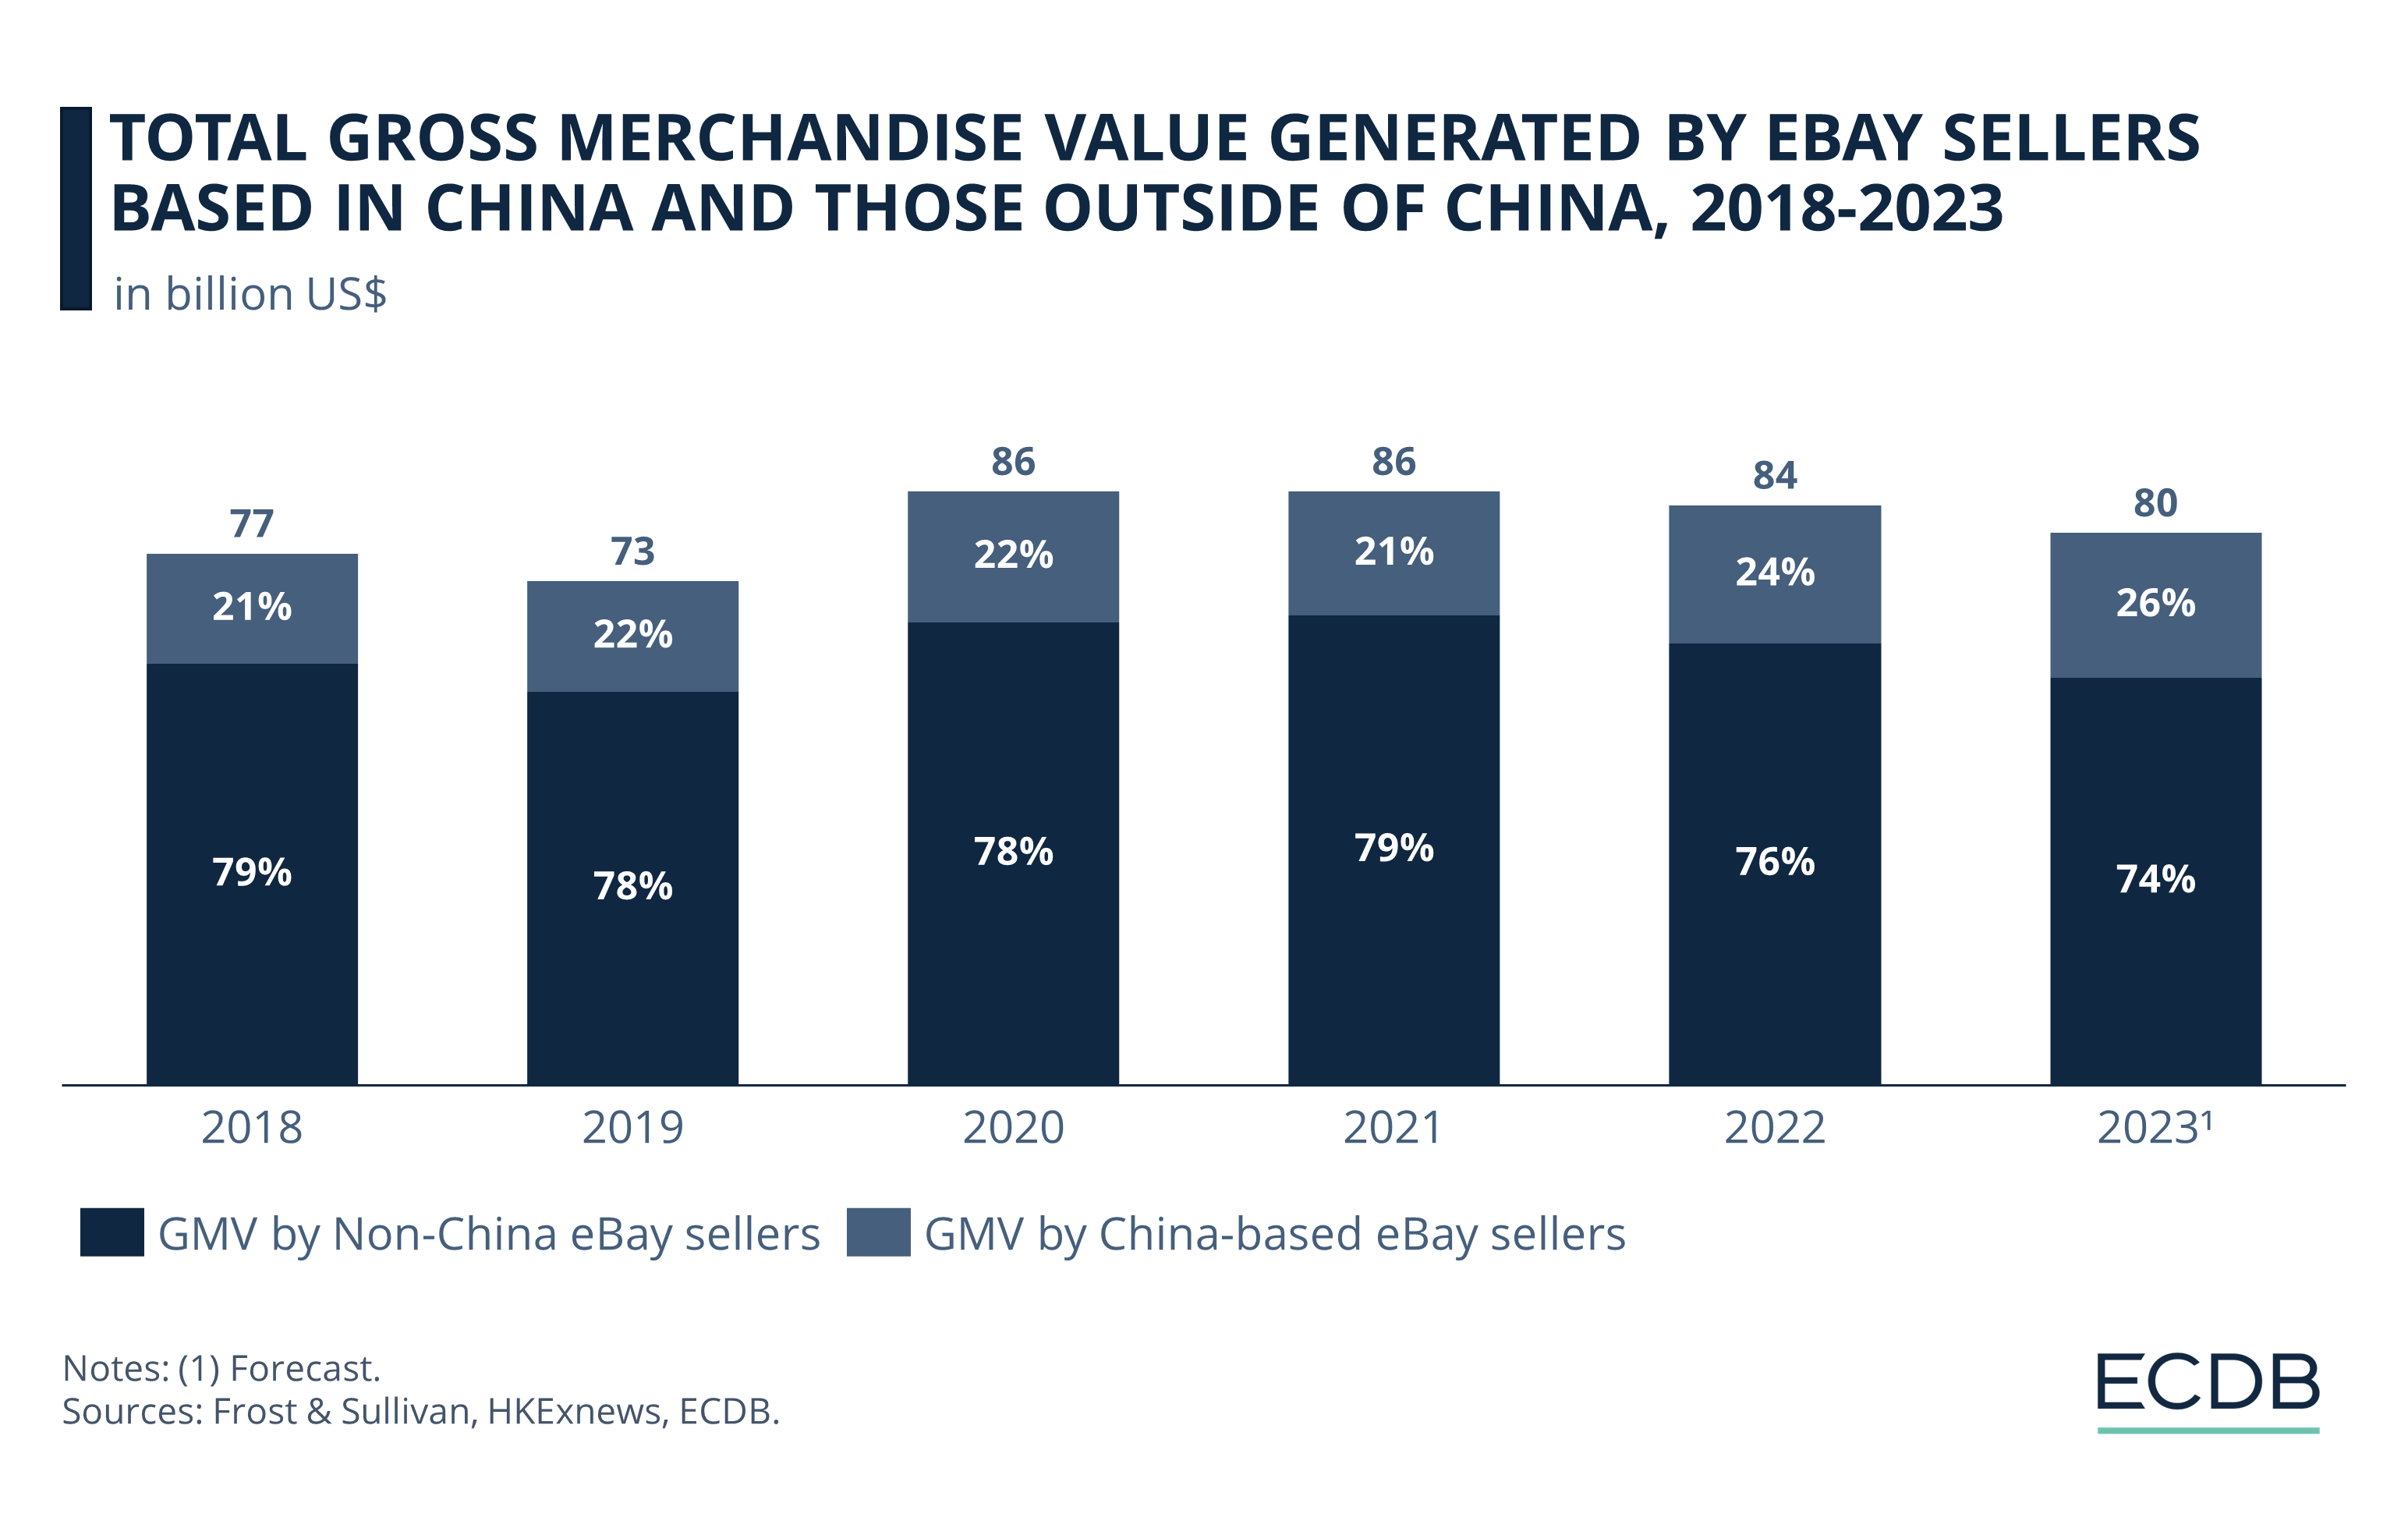 Total GMV Generated by eBay Sellers In and Outside of China, 2018-2022